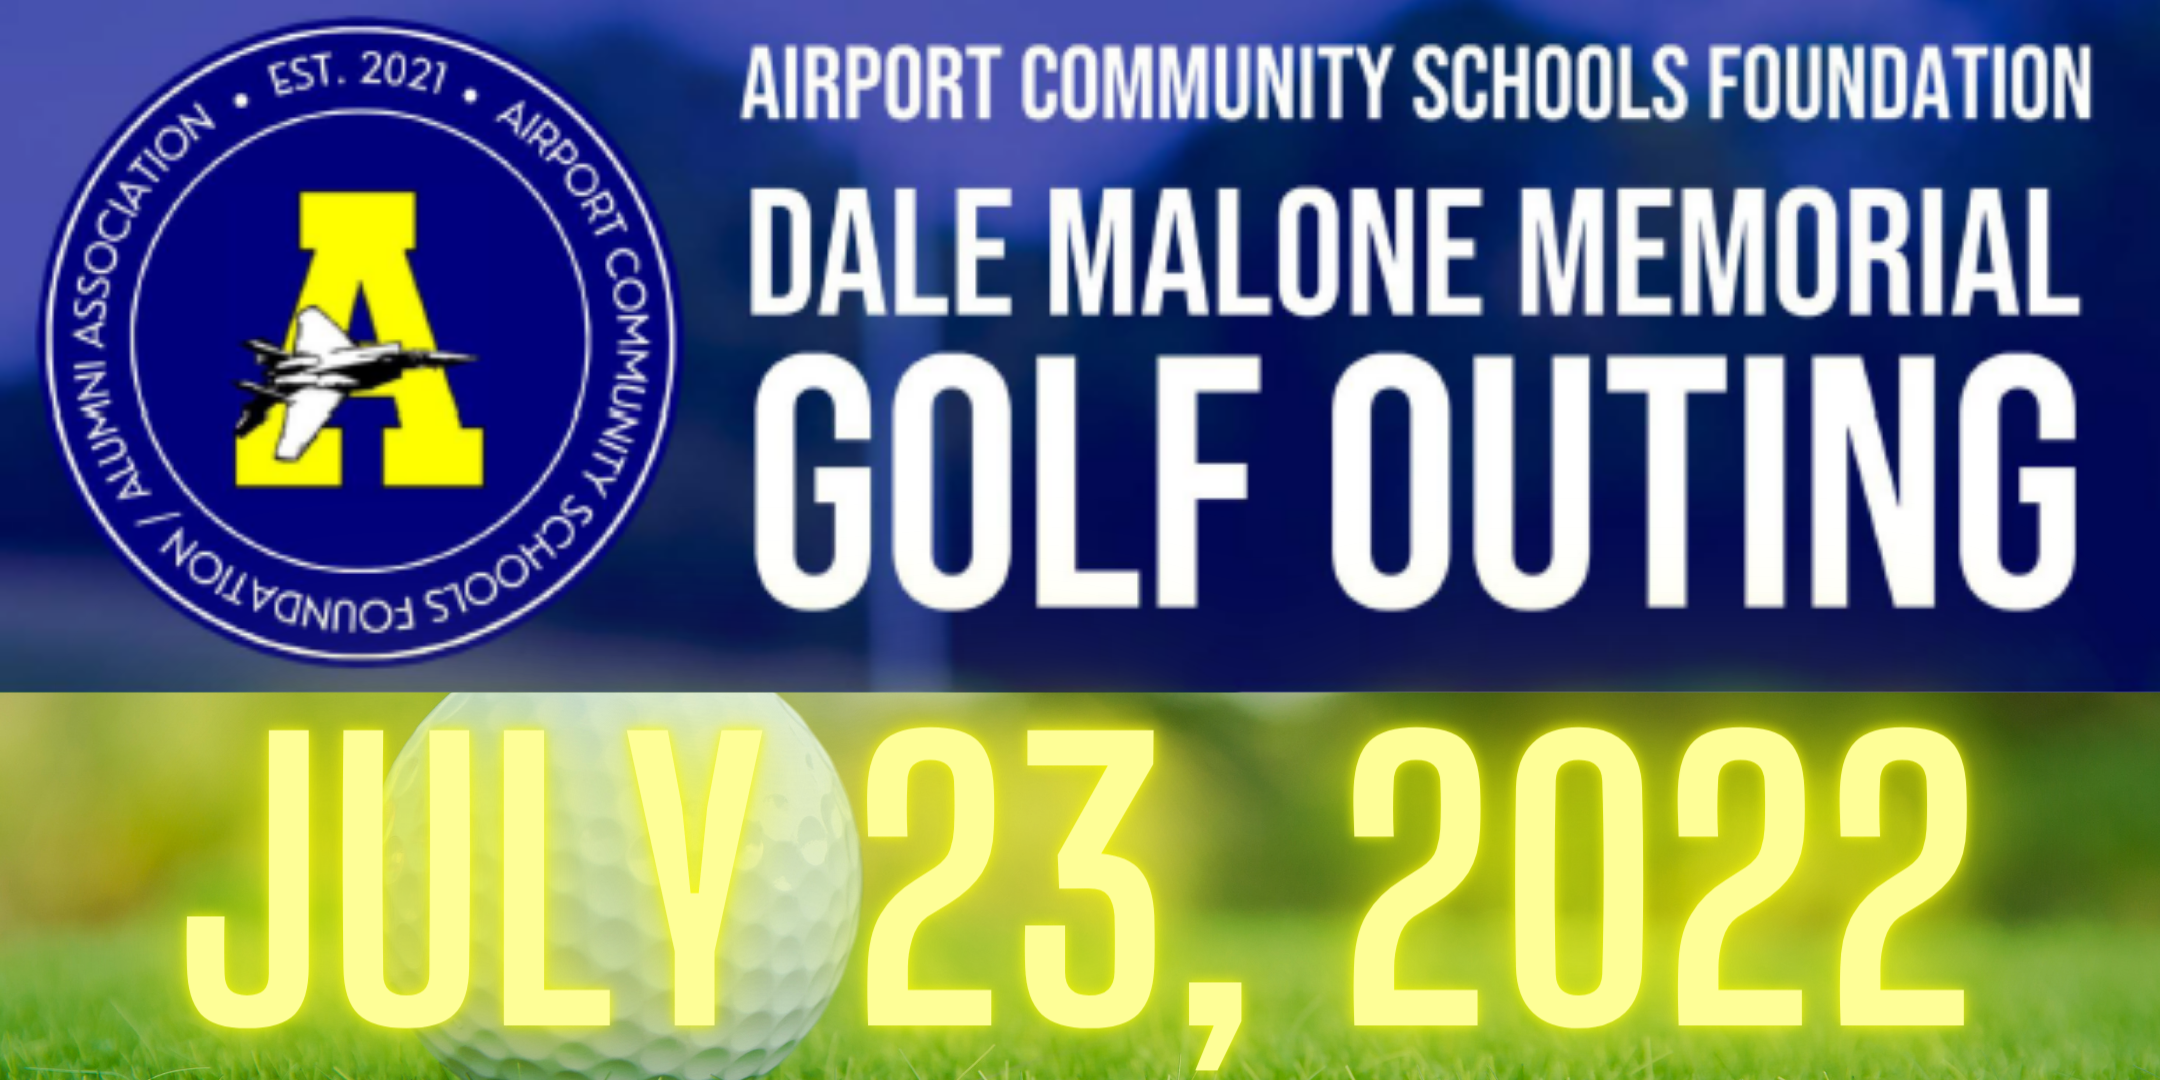 Dale Malone Memorial Golf Outing